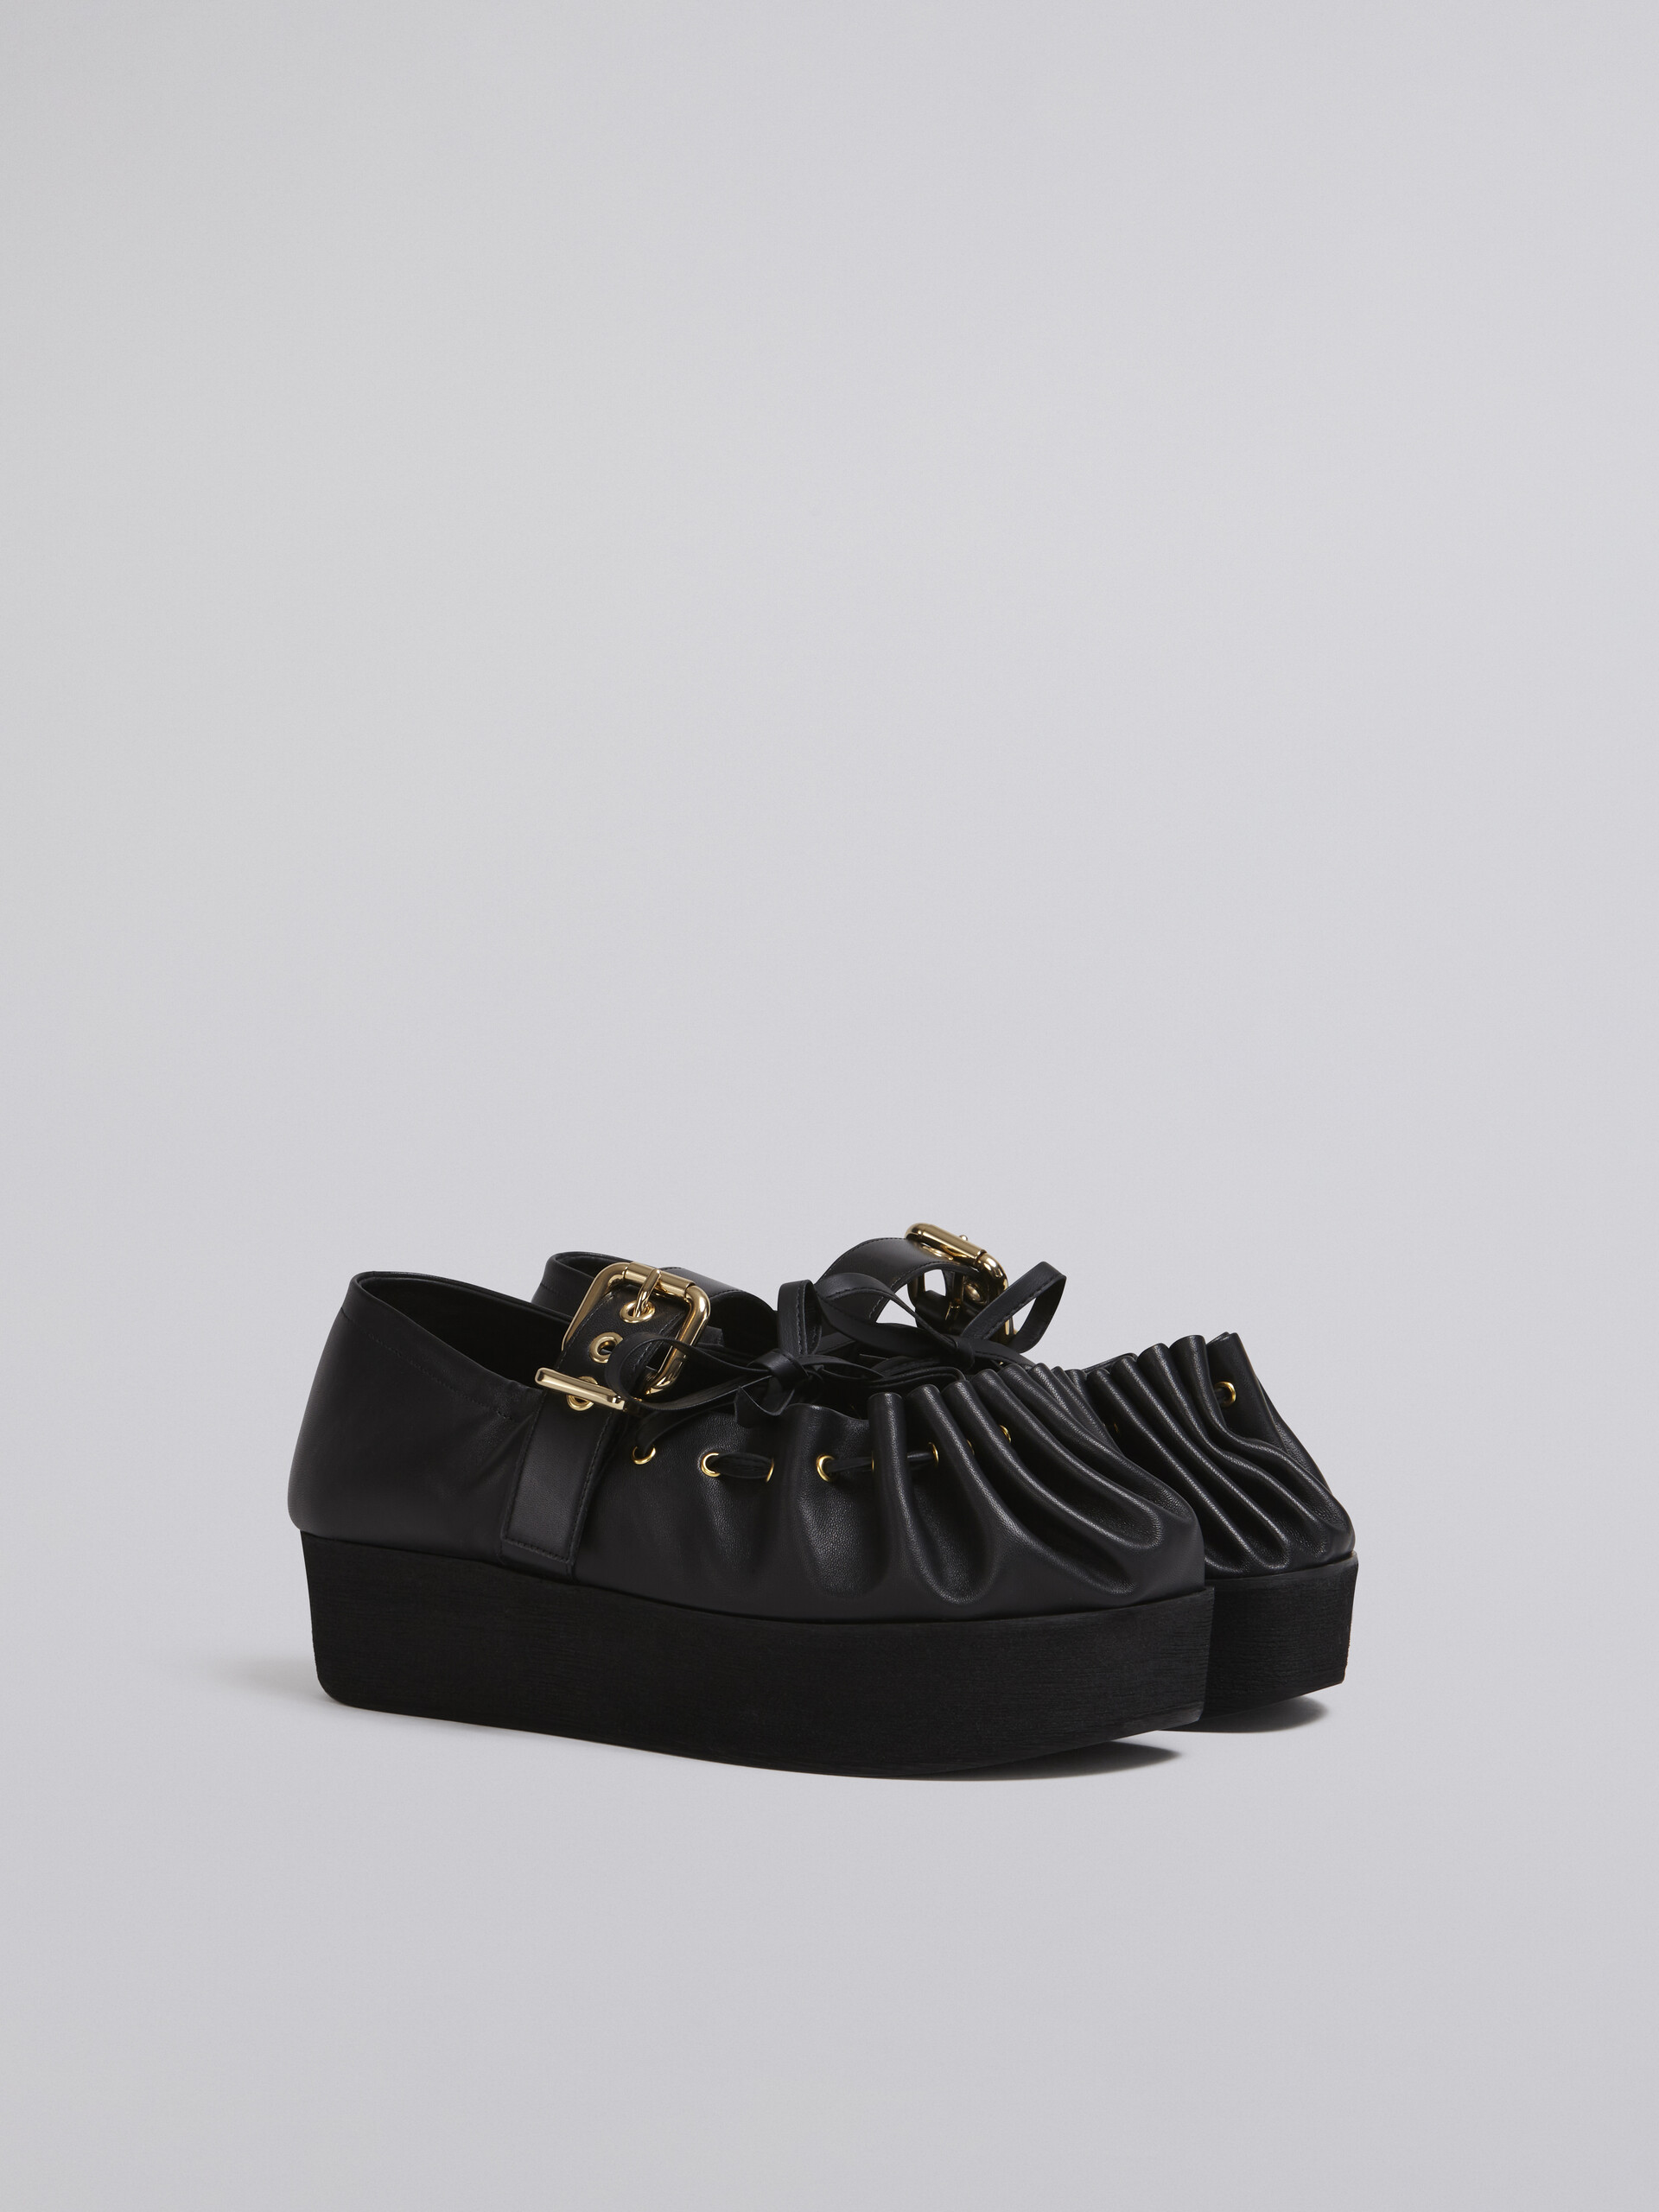 Nappa leather ballerina with rouched rounded captoe - Sandals - Image 2